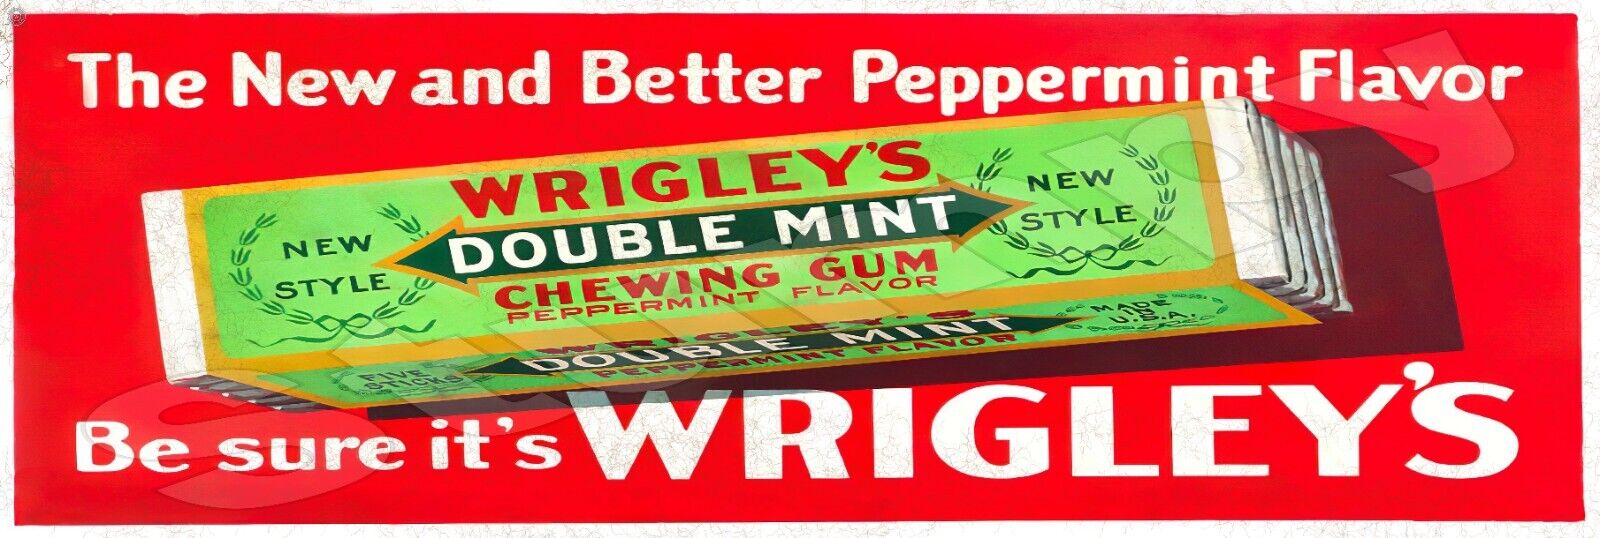 Wrigley's Chewing Gum  Metal Sign 6